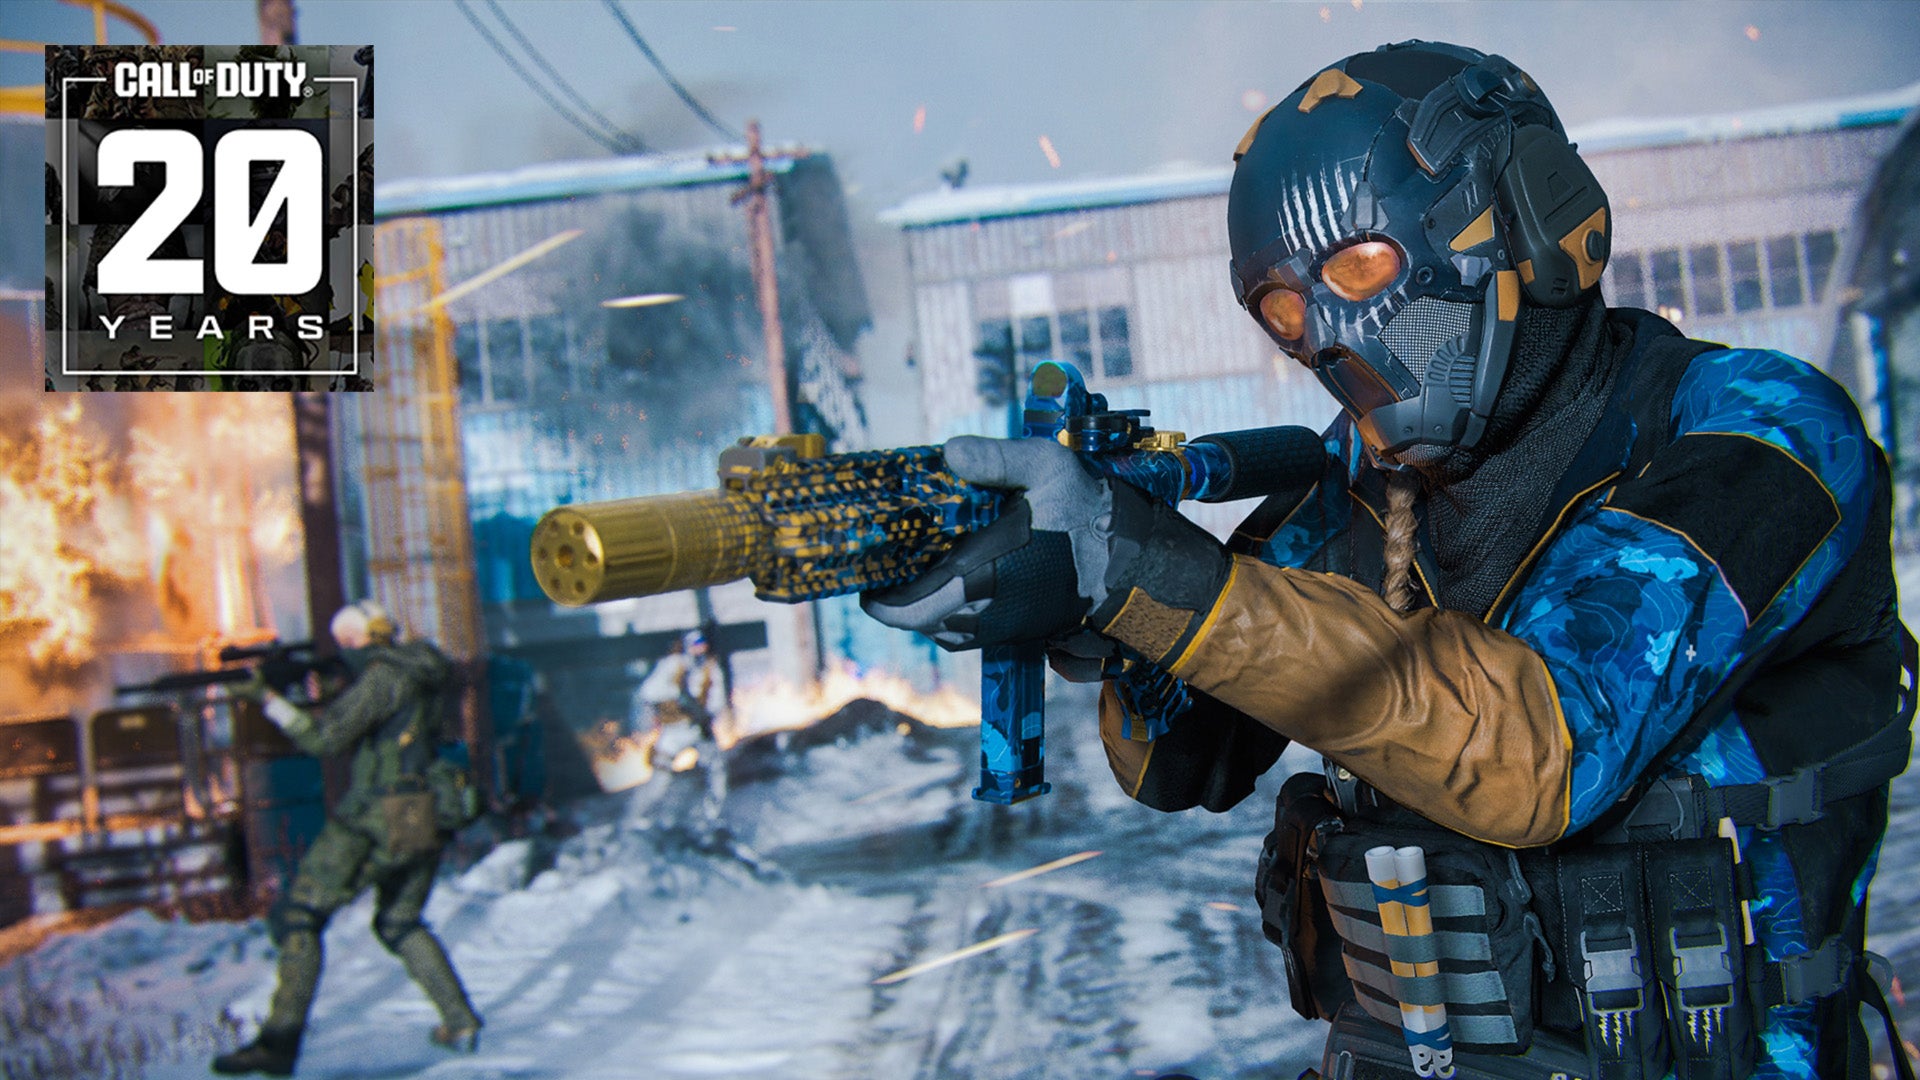 A Call of Duty player uses a gold-tipped weapon on a snowy map. 